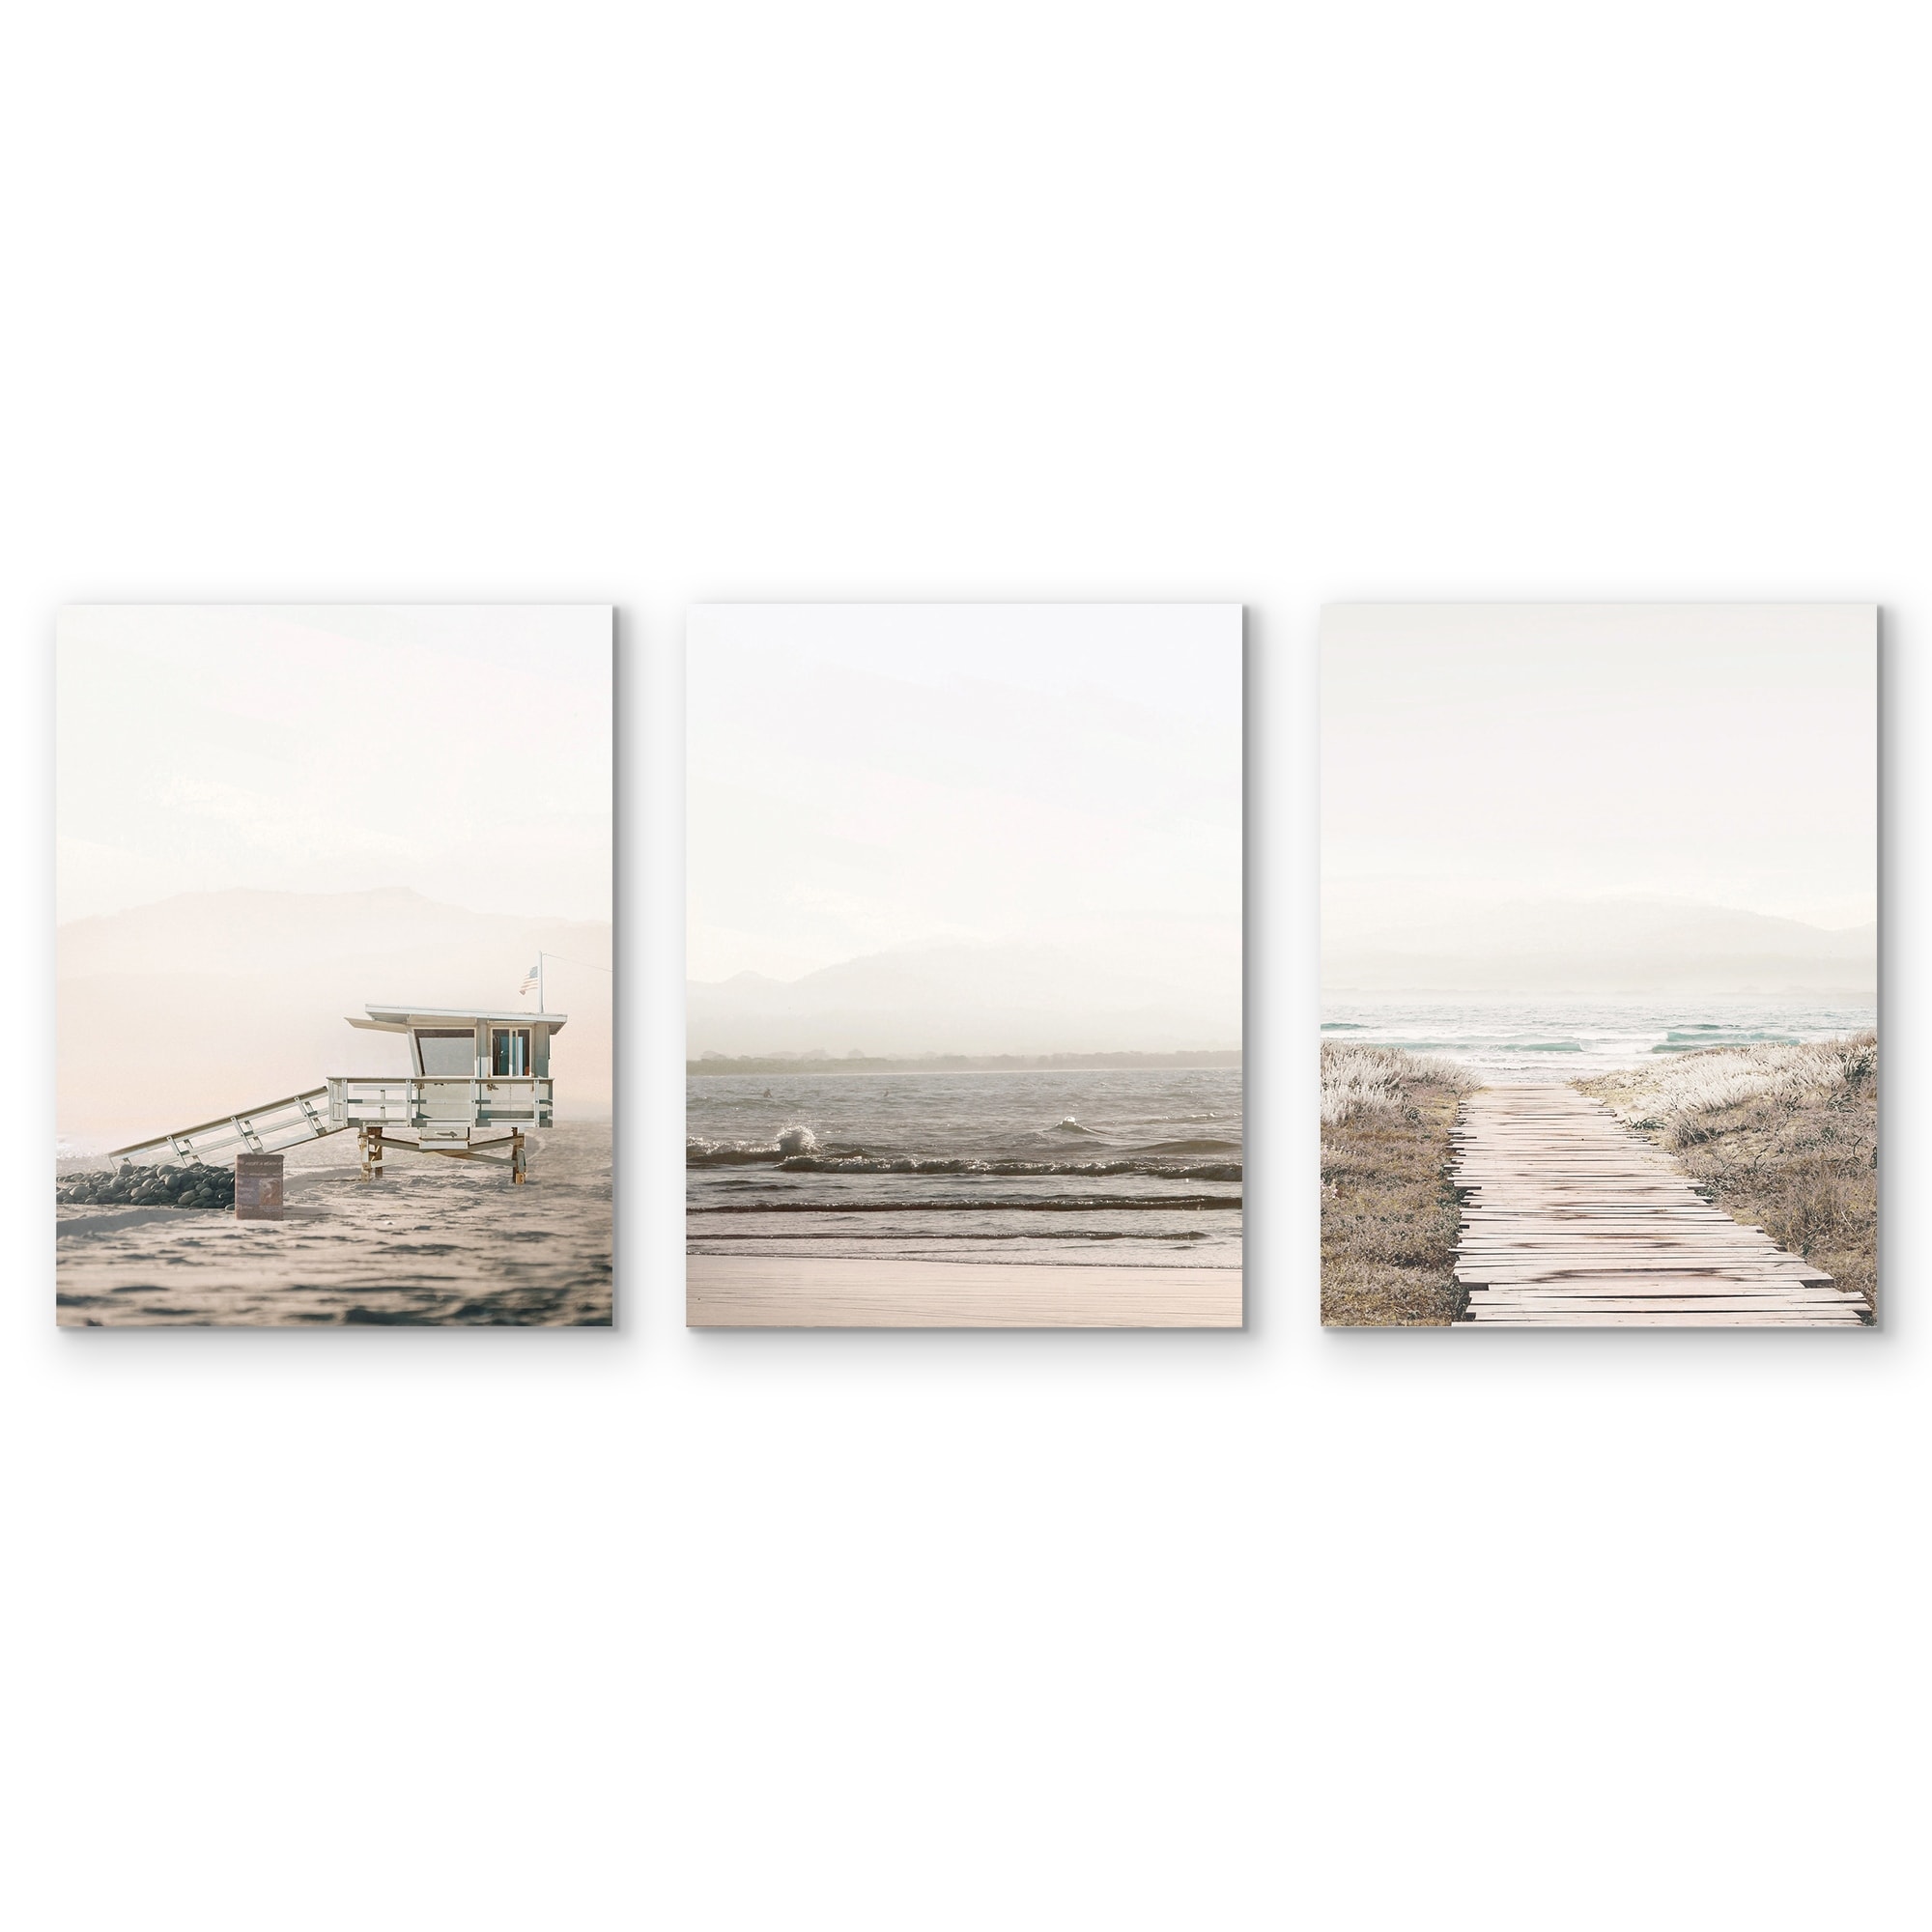 Americanflat 3 Piece 8x10 Unmatted Framed Print Set - National Park Canada  by Artvir